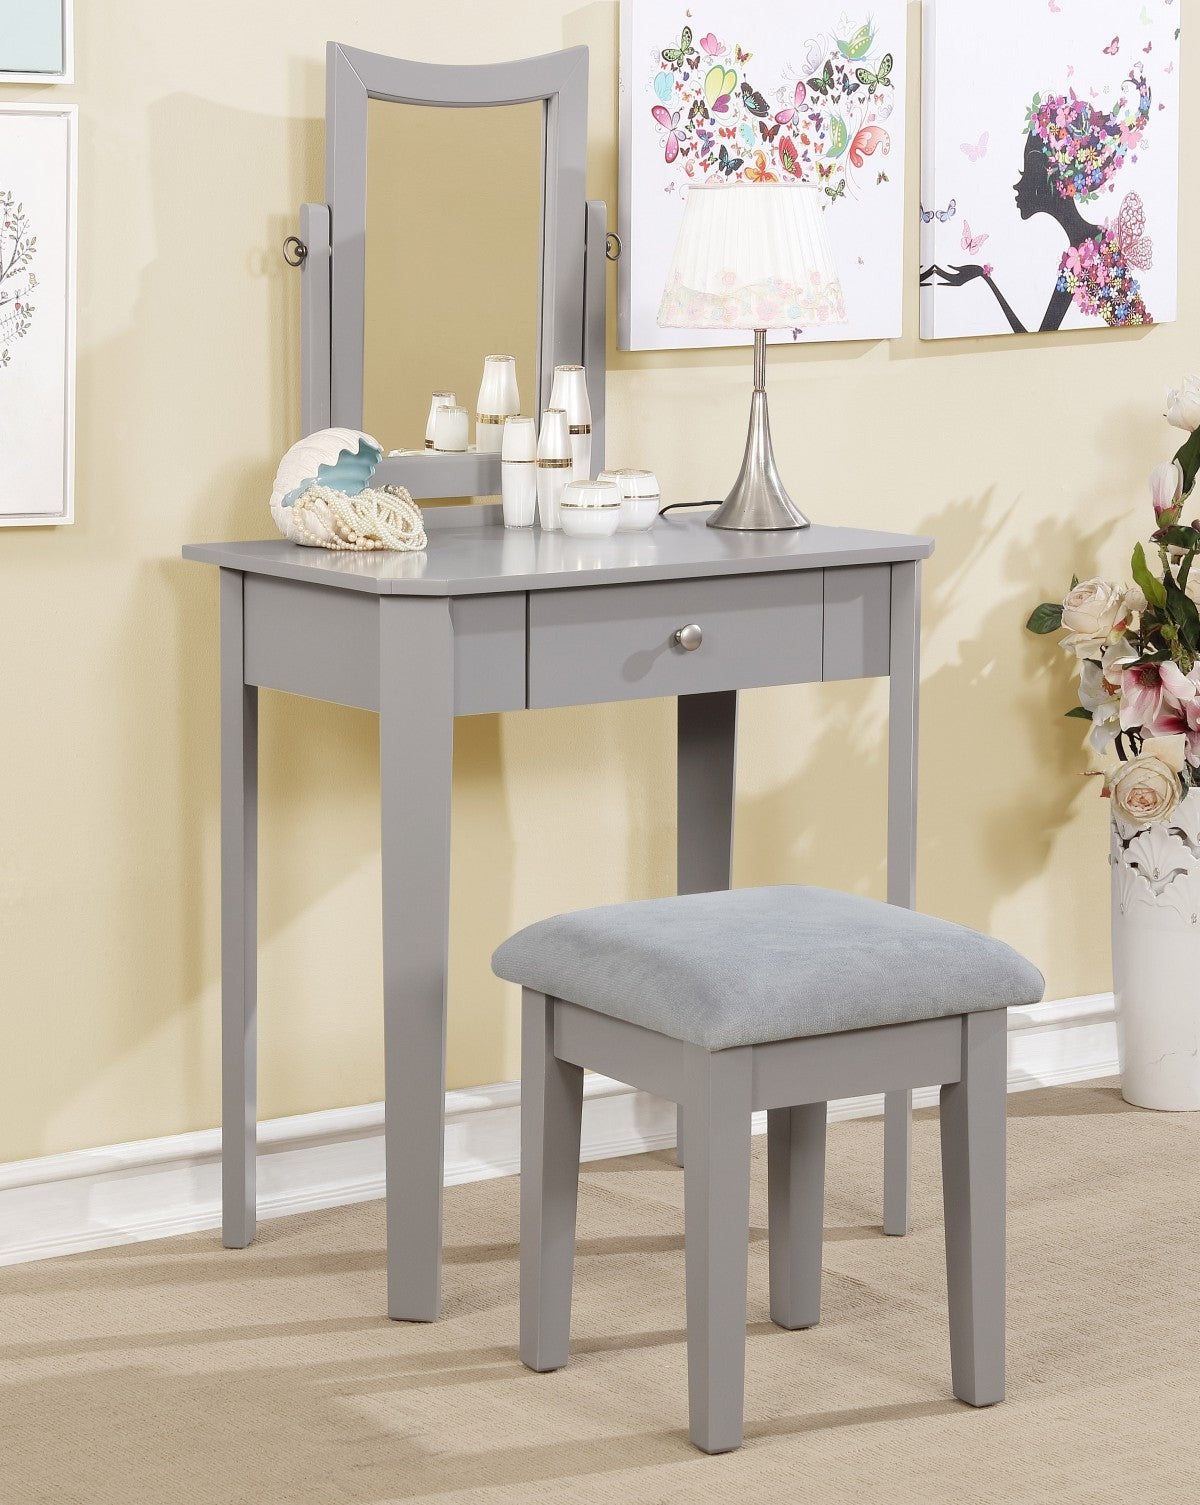 Anabella Vanity with Stool - Grey